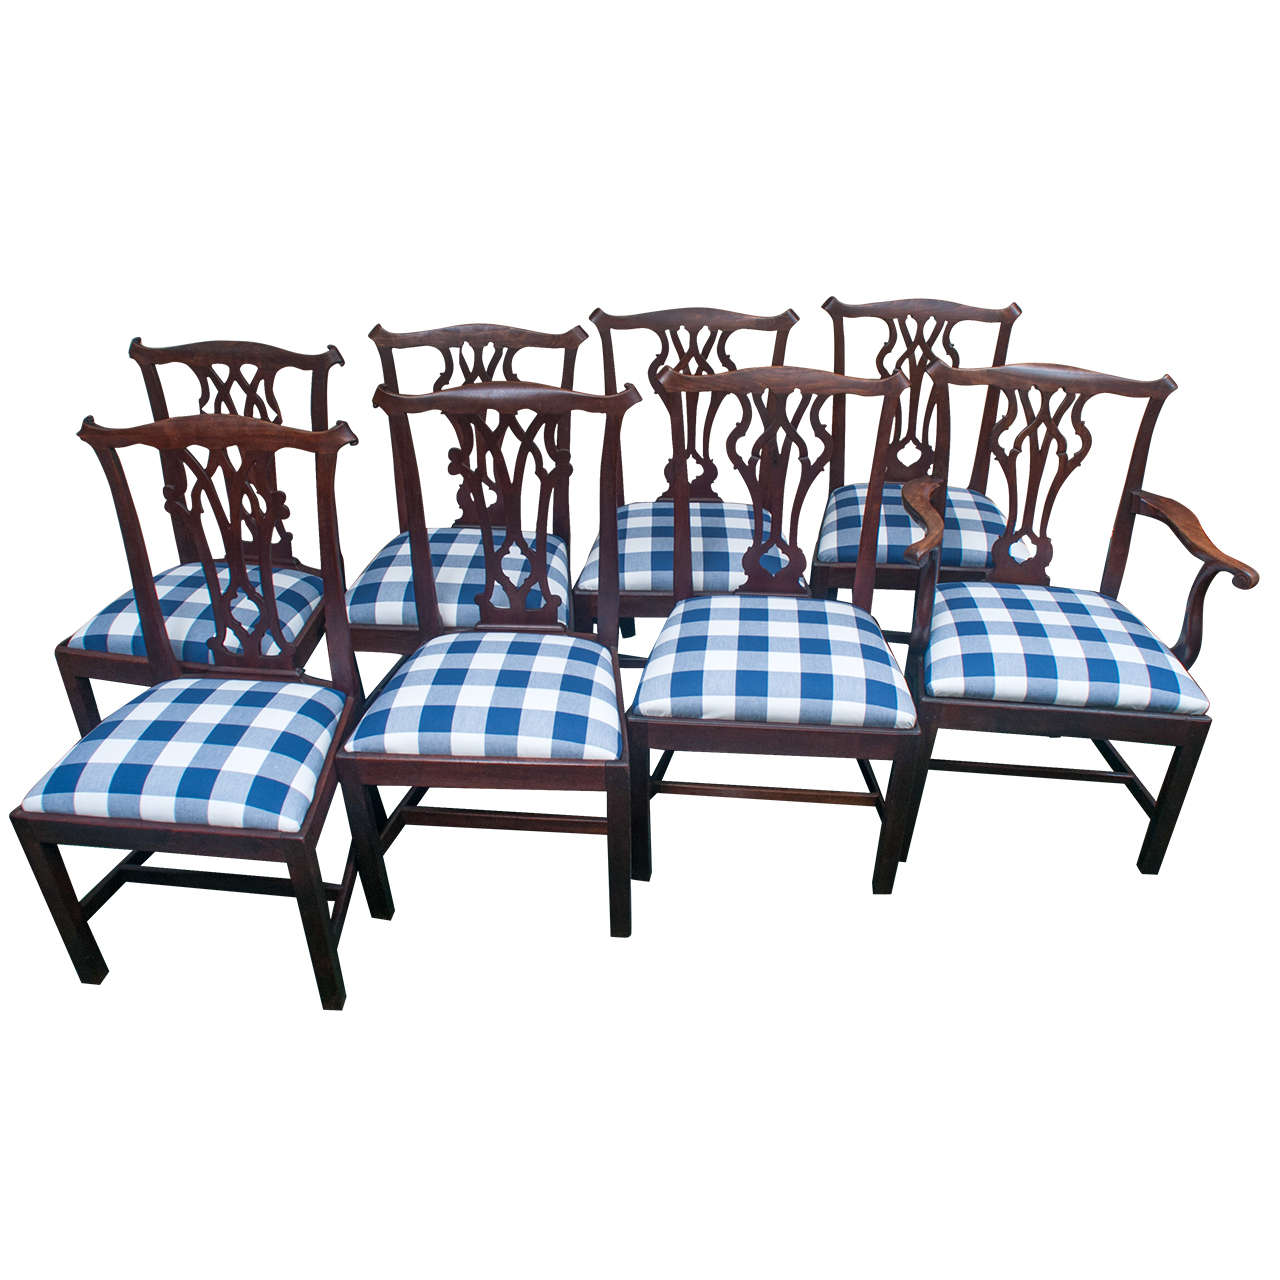 Assembled Set of Country Chippendale Chairs